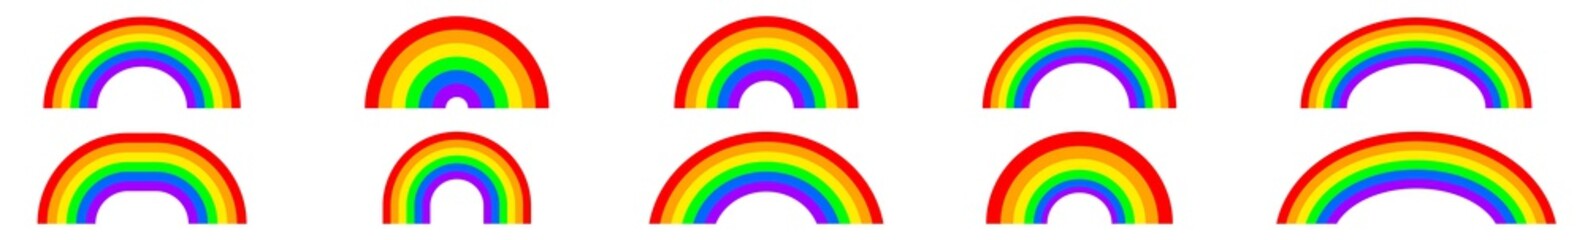 Rainbow Icon Colors | Rainbows | Peace Symbol | Weather Logo | Happy Sign | Isolated | Variations